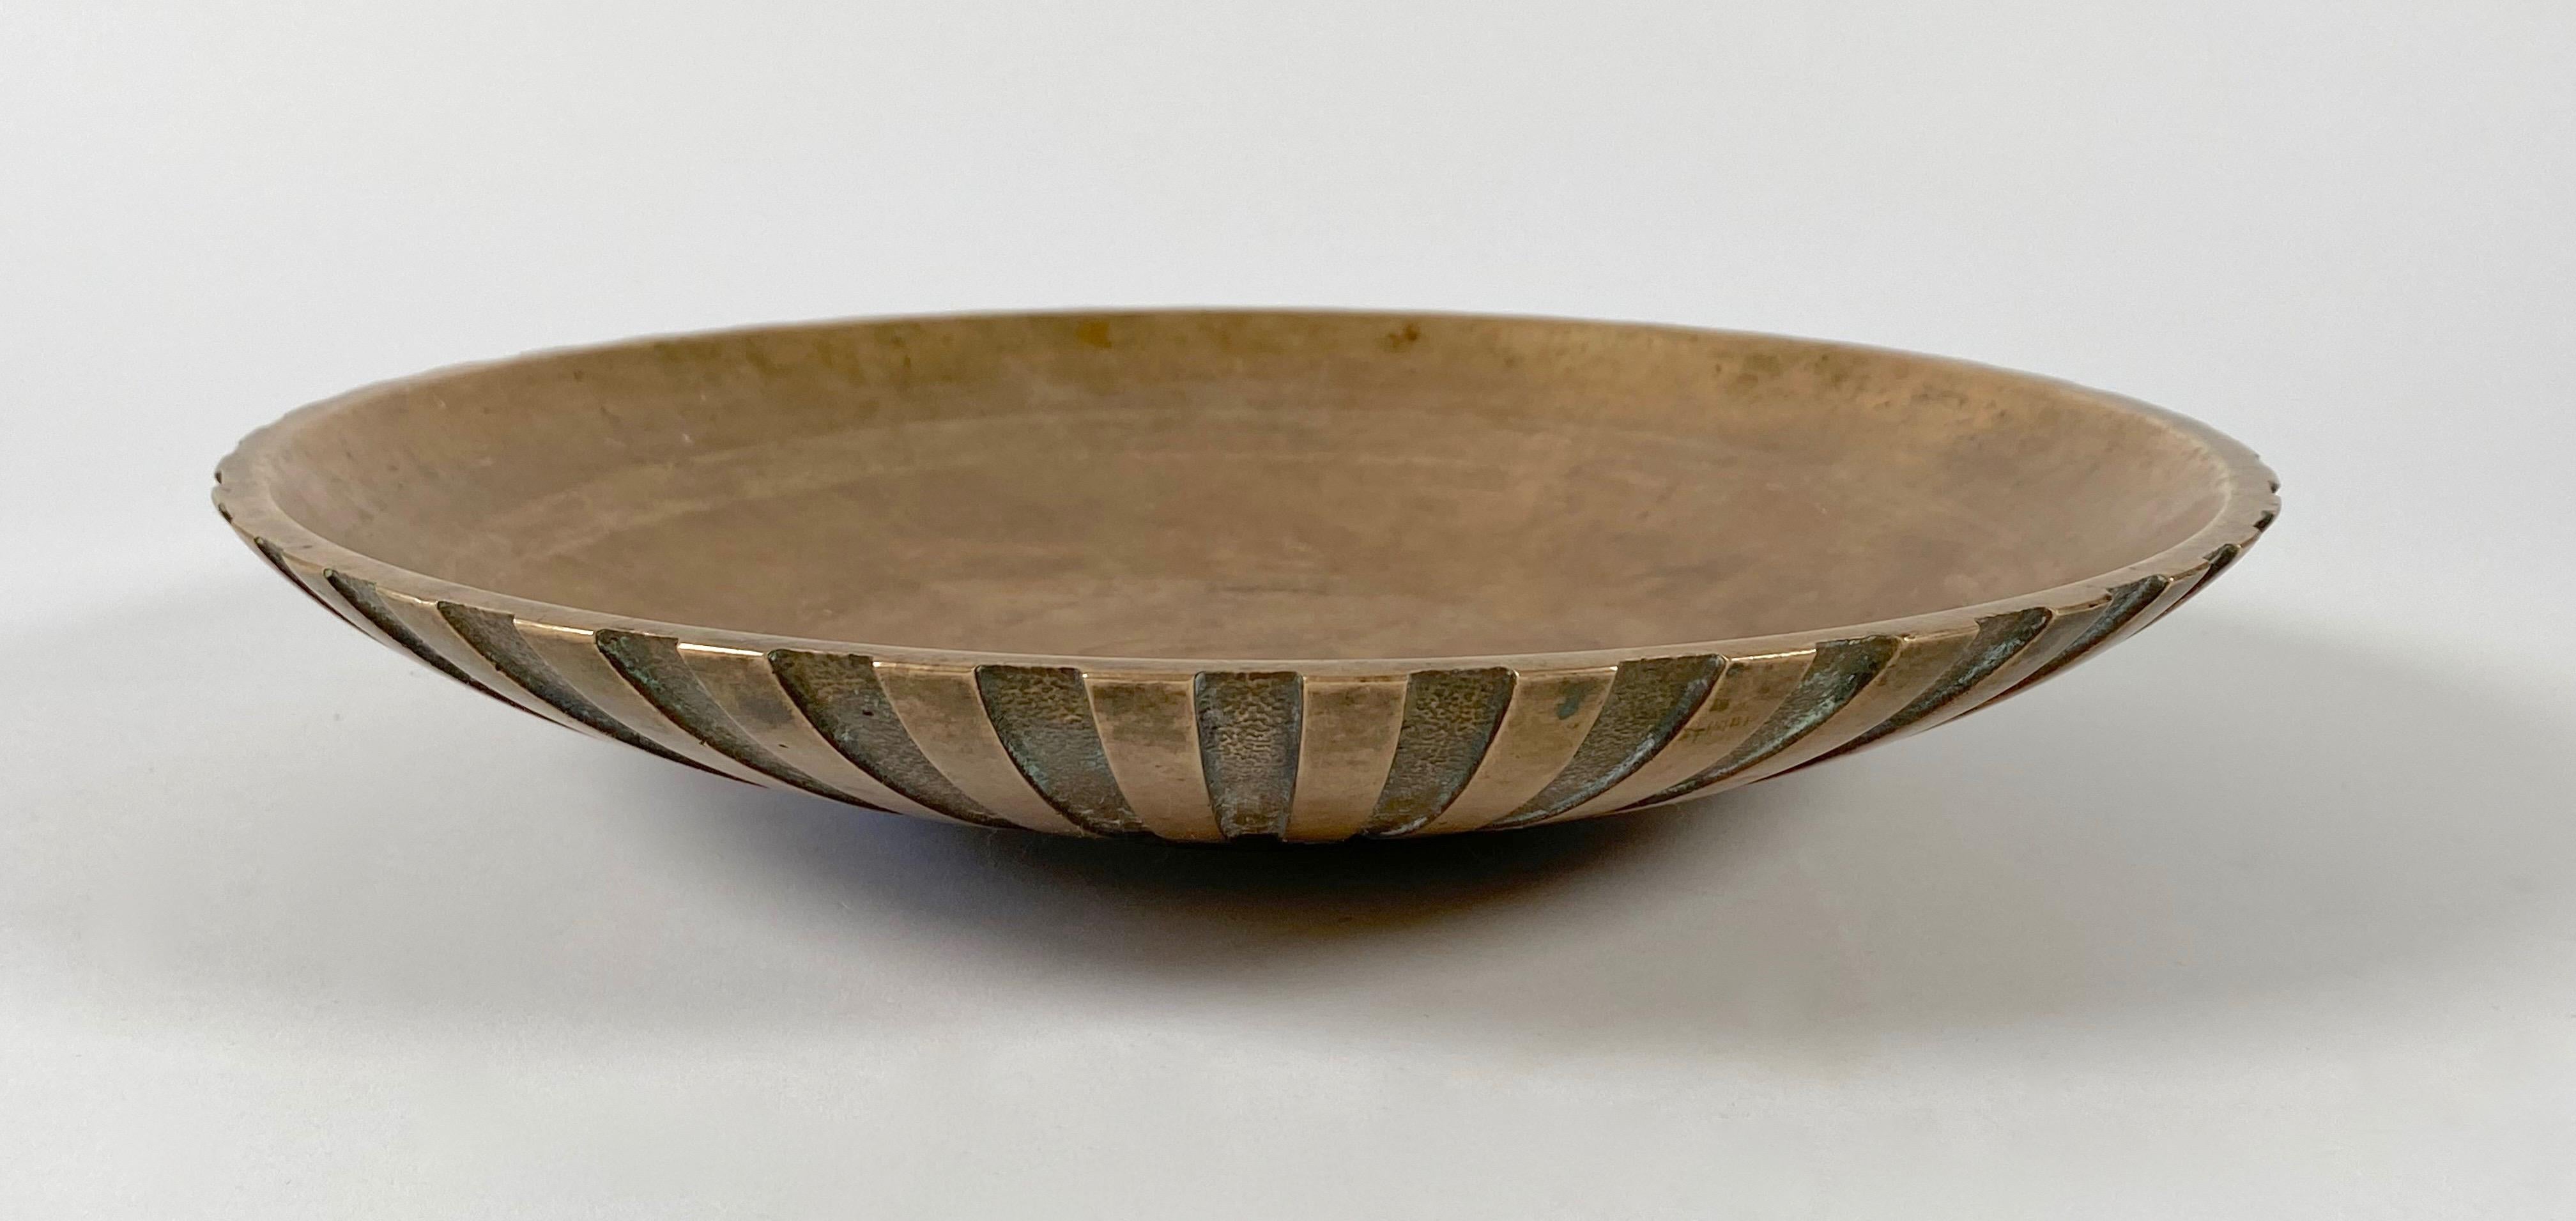 Bronze bowl by Tino's of Denmark, with an expanse of radial lines emanating from the bottom center creating a sunburst effect, deeply grooved with a textural element adjacent running in parallel. The bowl is created out of solid bronze and has much